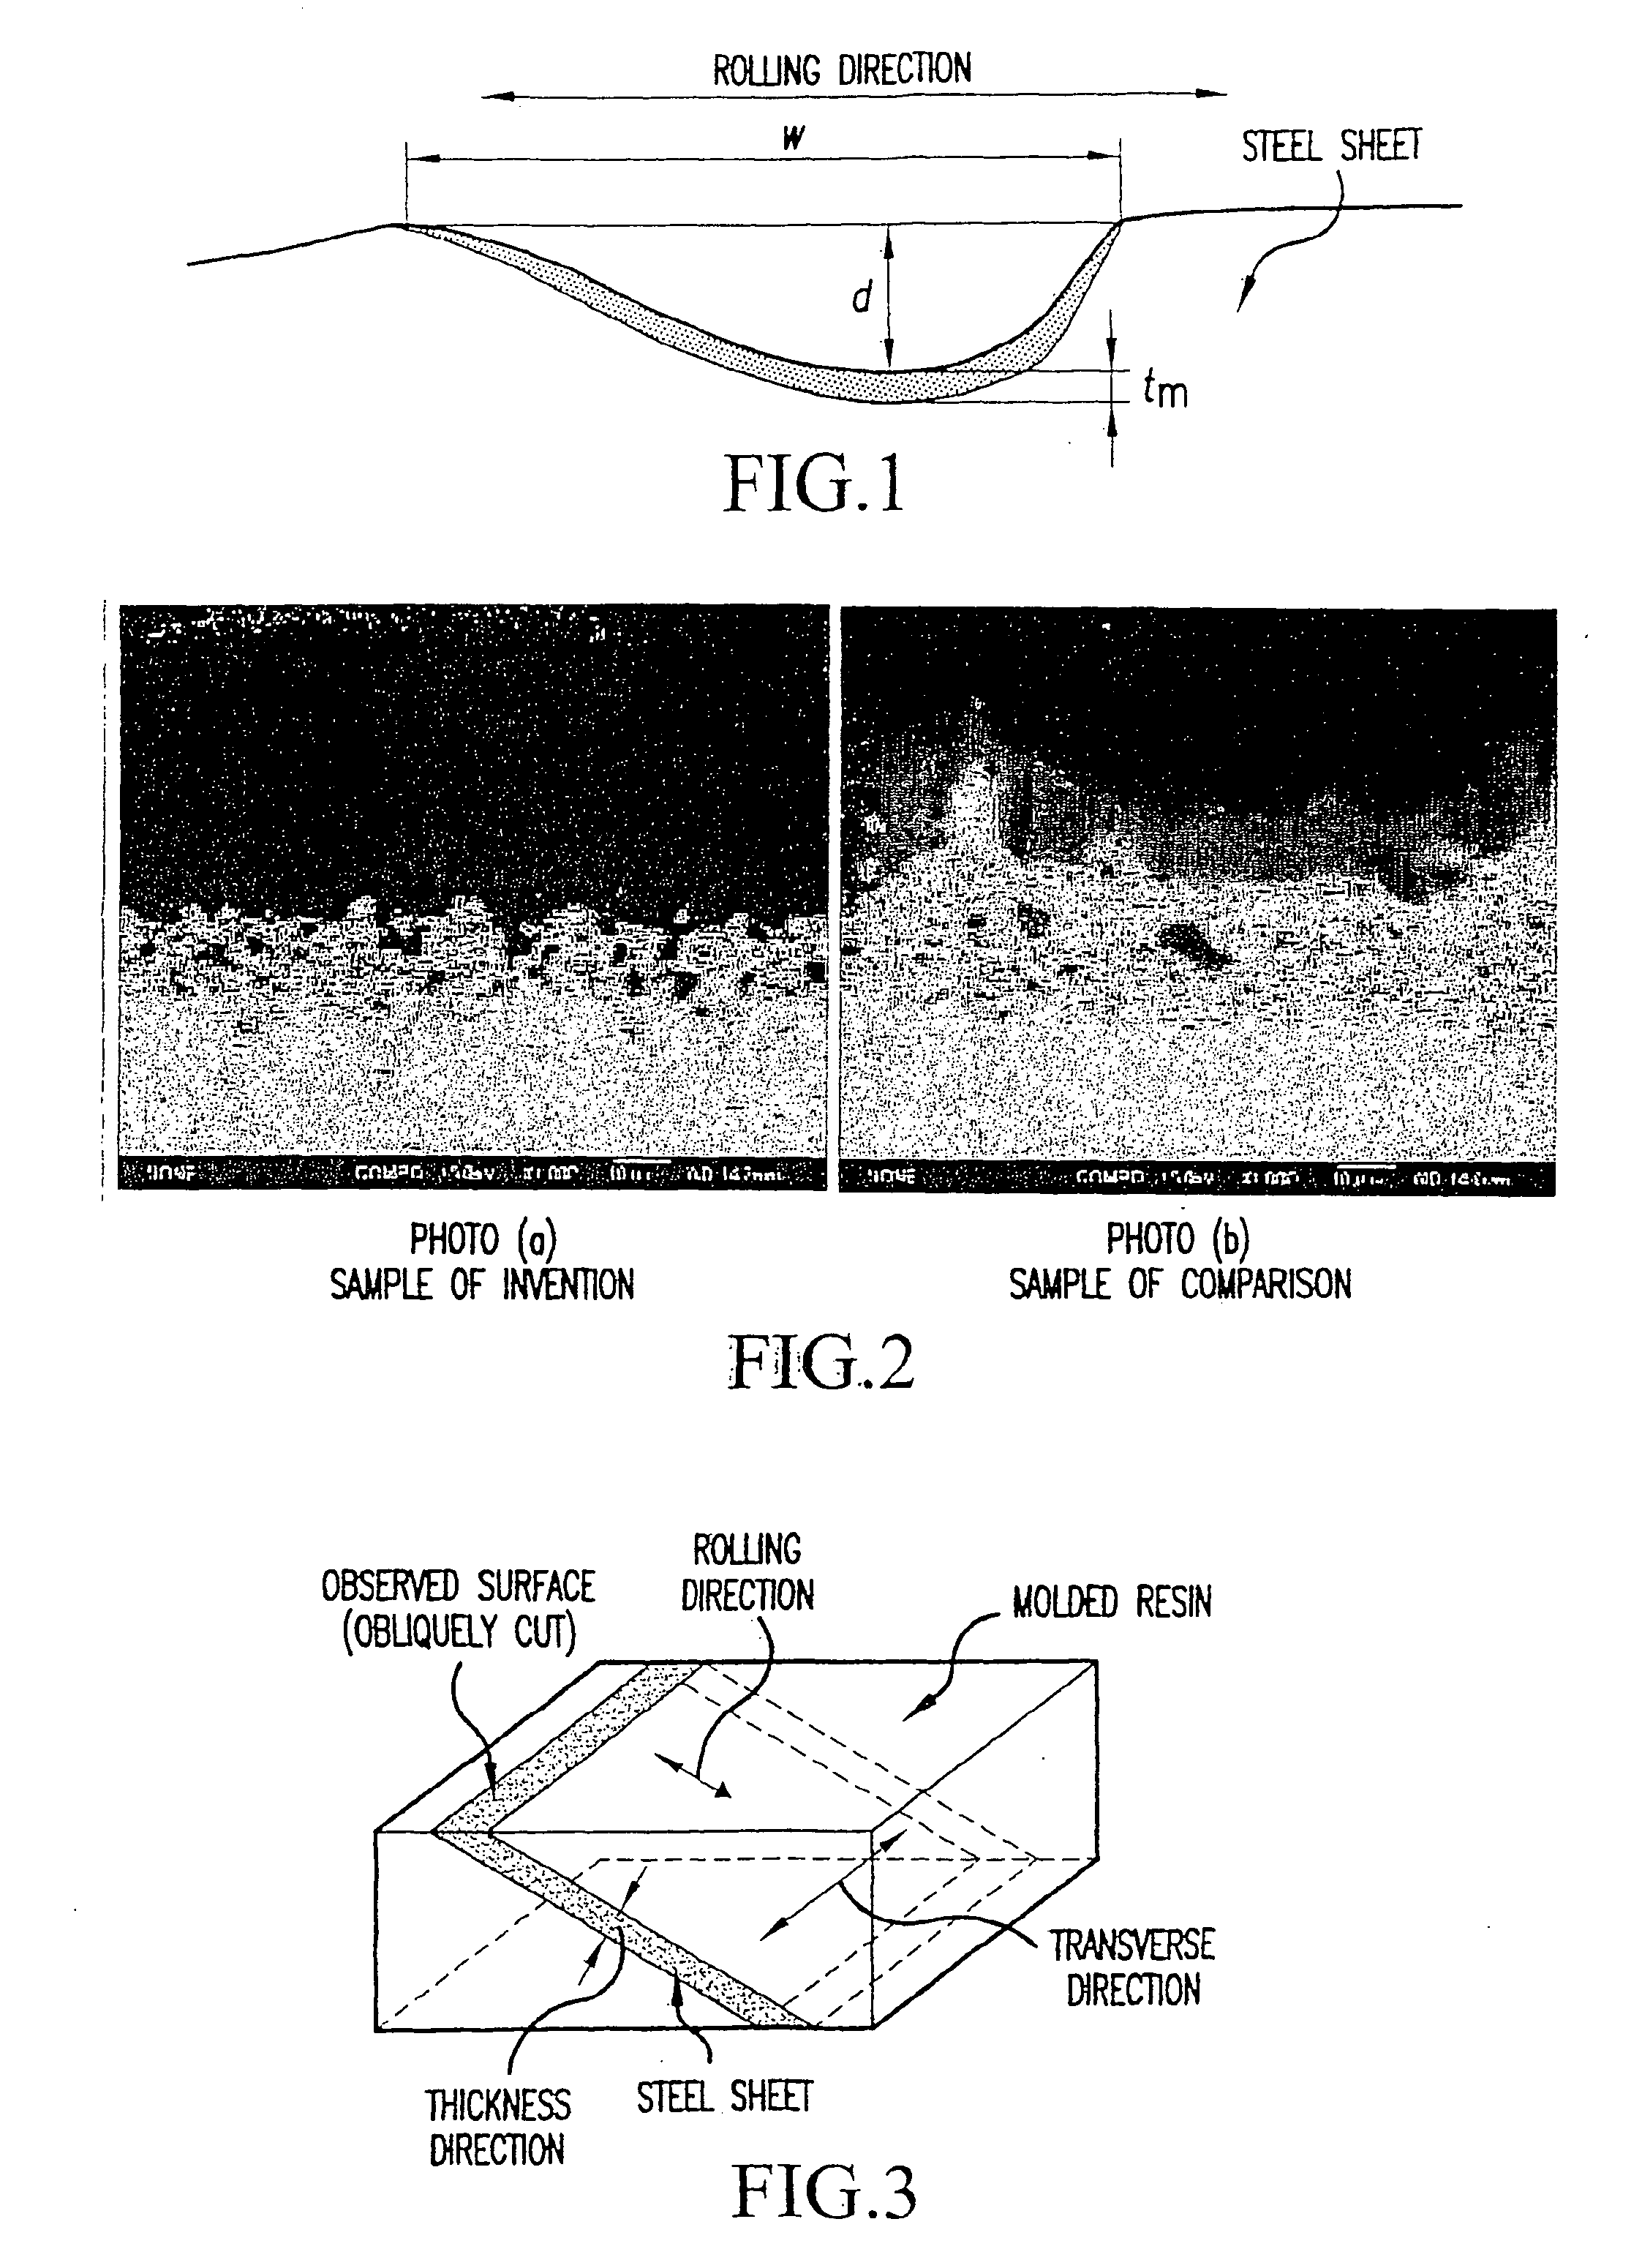 Low core loss grain-oriented electrical steel sheet and method for producing the same